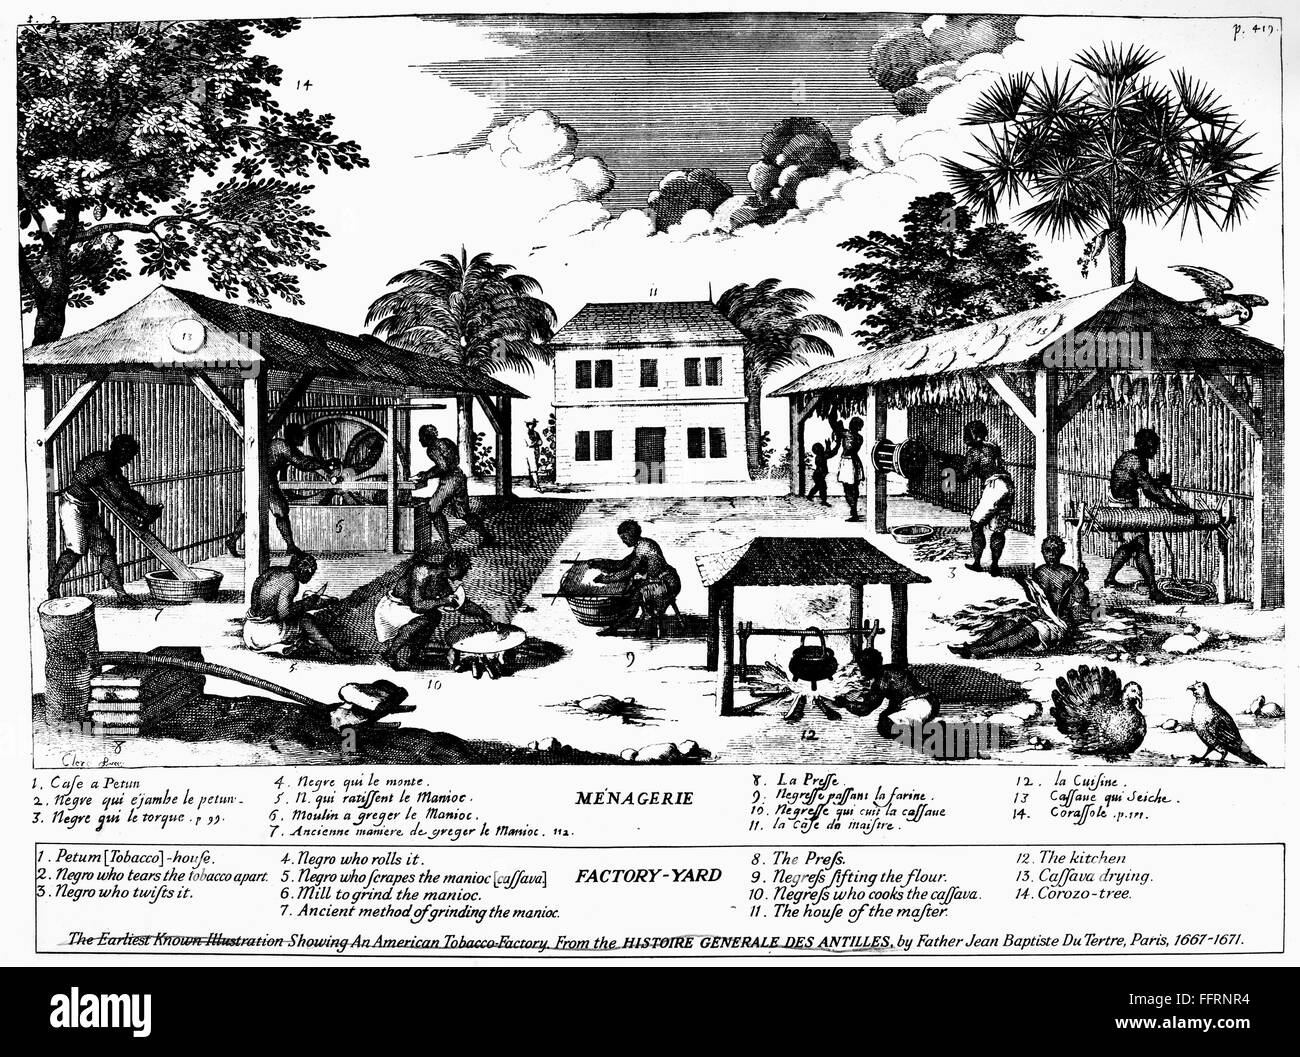 TOBACCO PLANTATION, c1670. /nAfrican slaves working on a tobacco plantation  in the French West Indies. Line engraving from 'General History of the  Antilles' by Father Jean Baptiste Du Tertre, Paris, 1661-1671. This